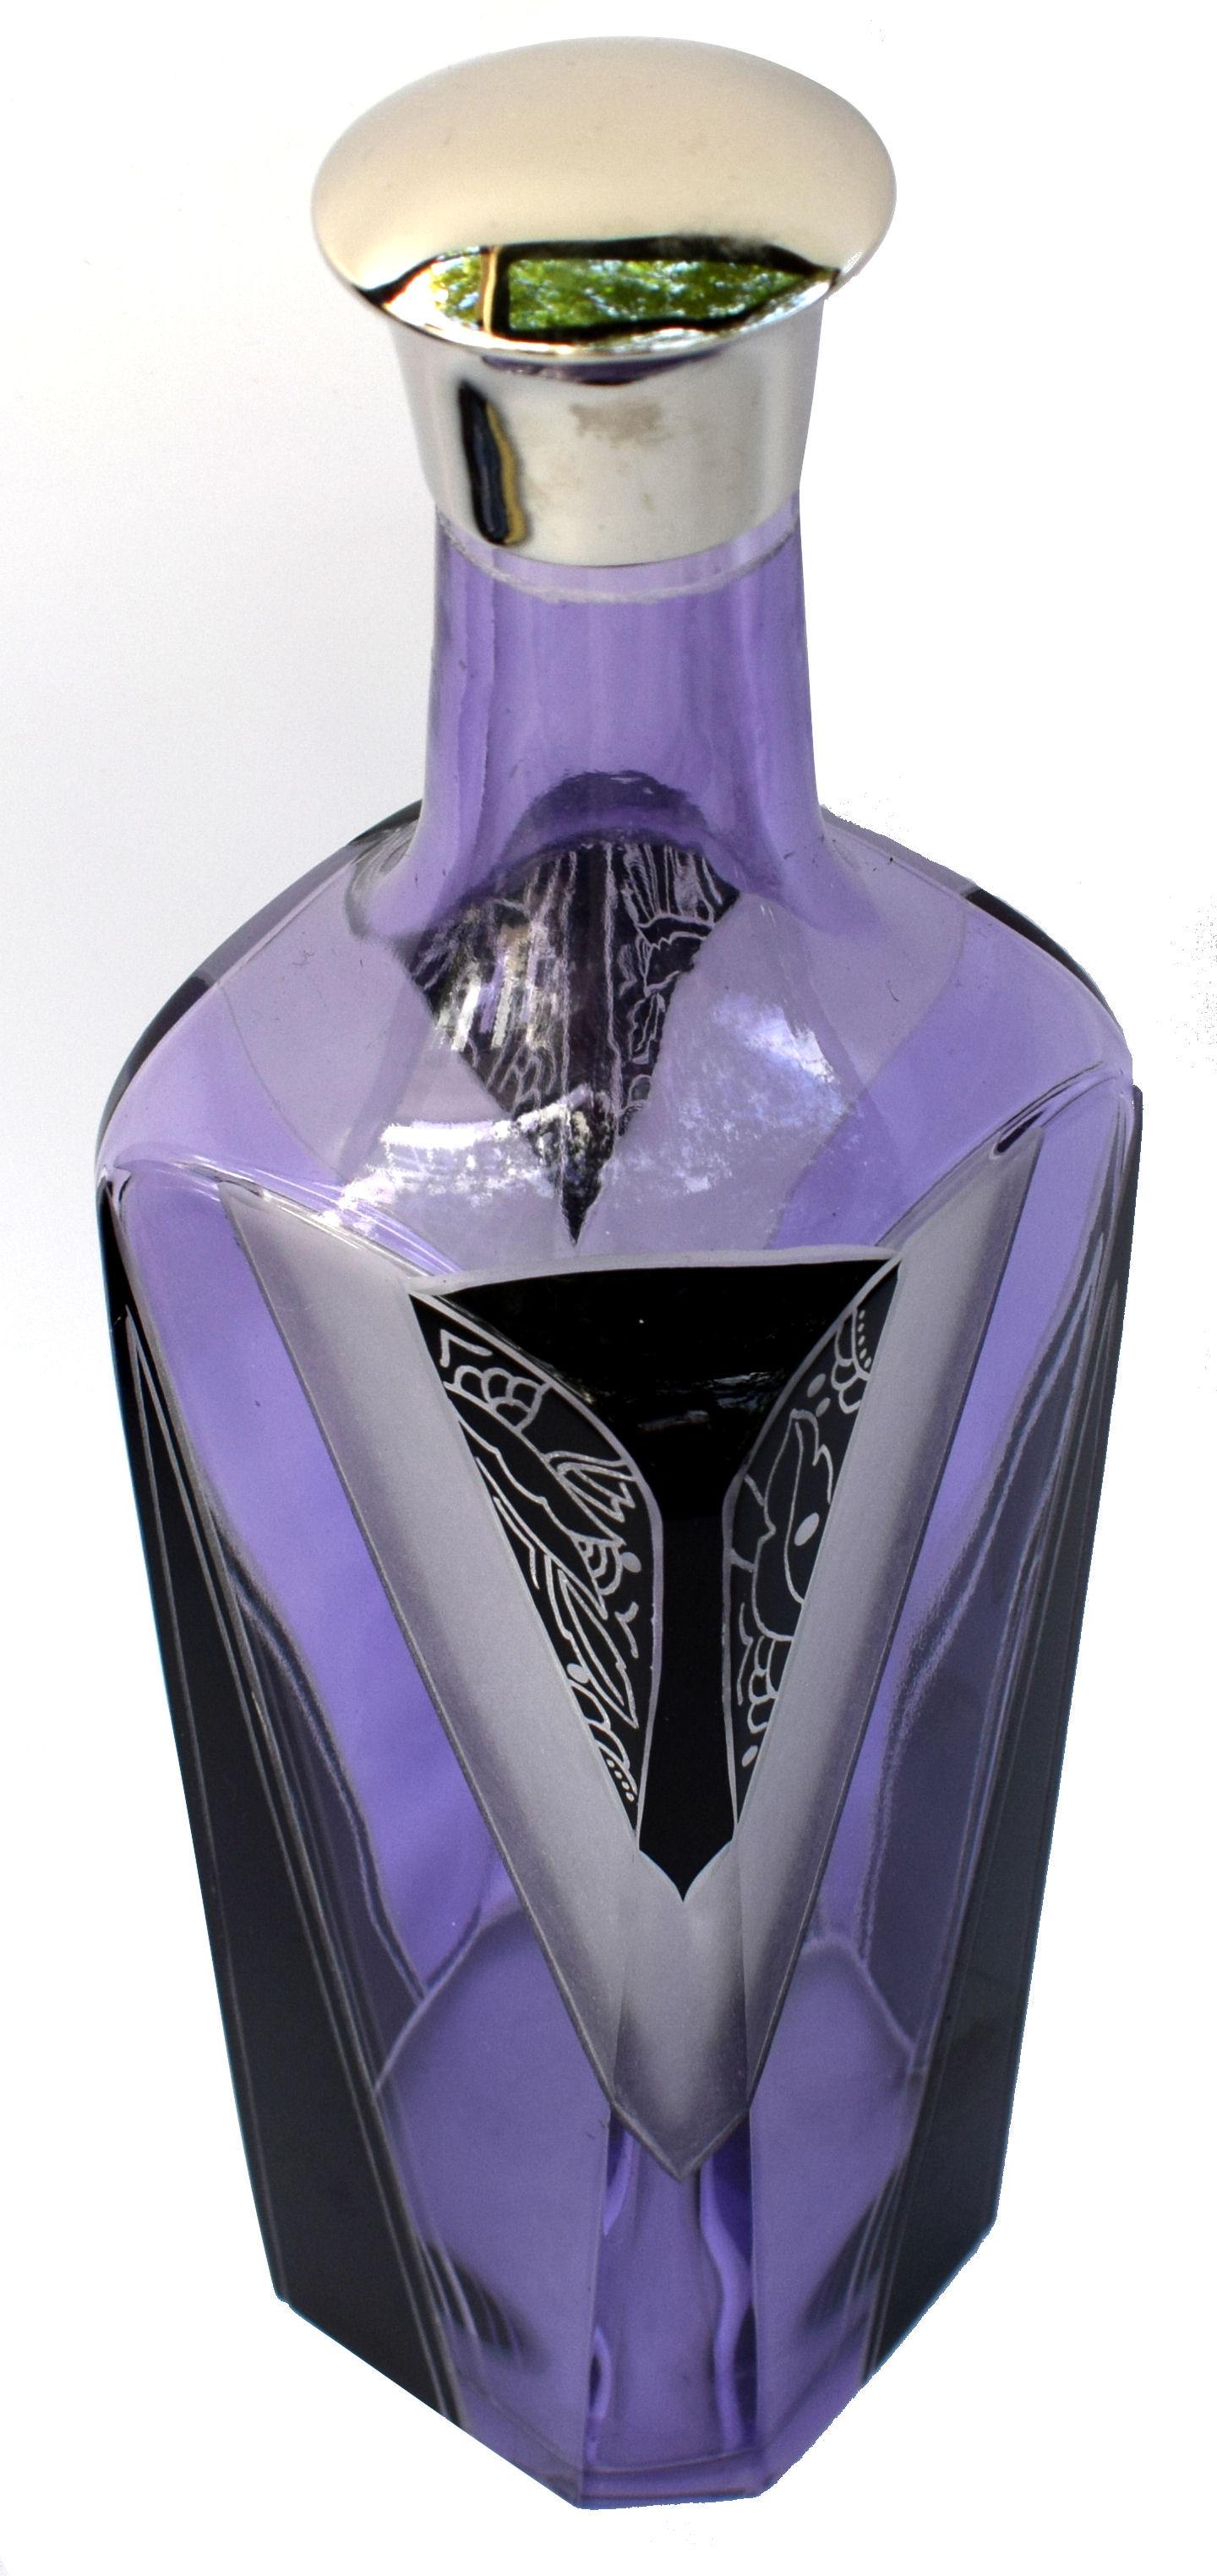 Very high quality and beautifully crafted collectable Art Deco glass liquor decanter set by Karl Palda. Featuring mauve coloured glass which is the back drop to black enamel decoration and etching accents. These Classic sets are rare and a beautiful